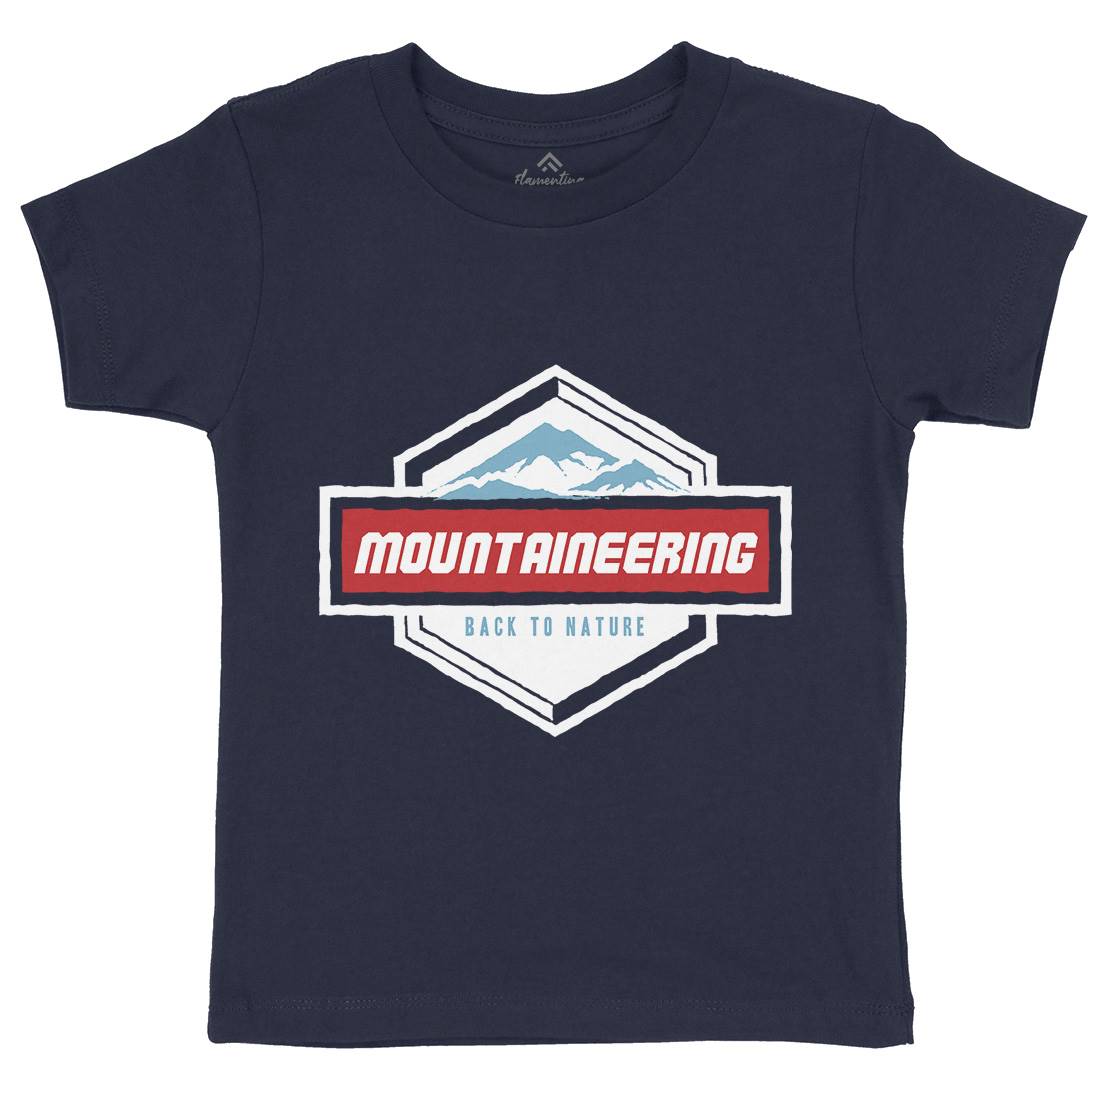 Mountaineering Kids Crew Neck T-Shirt Nature A350